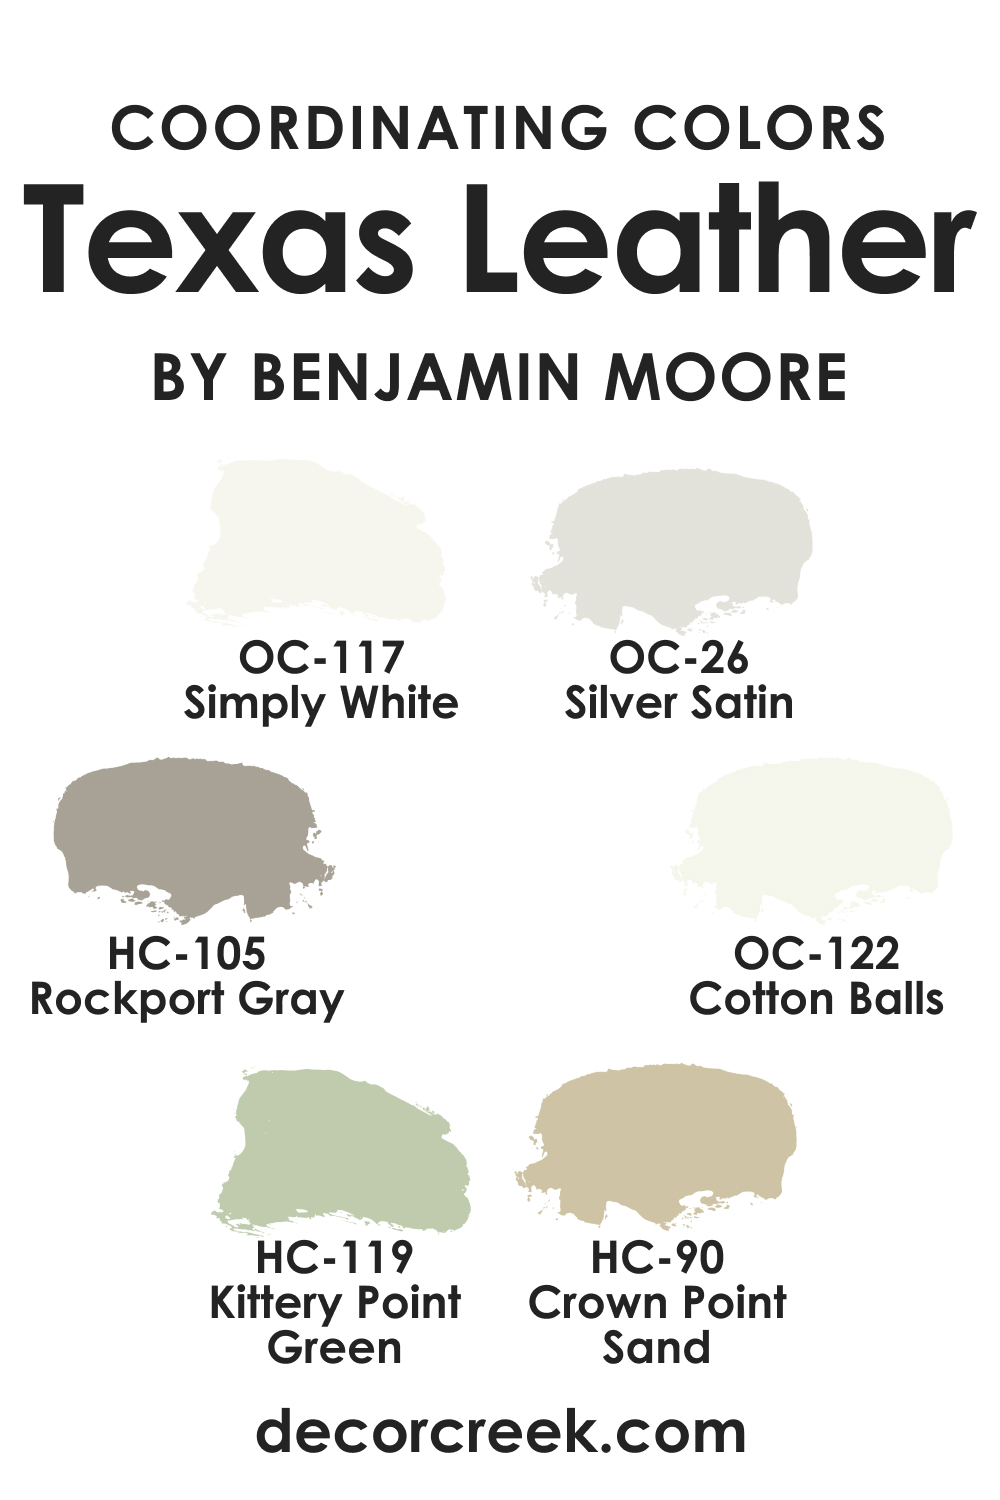 Coordinating Colors of Texas Leather AC-3